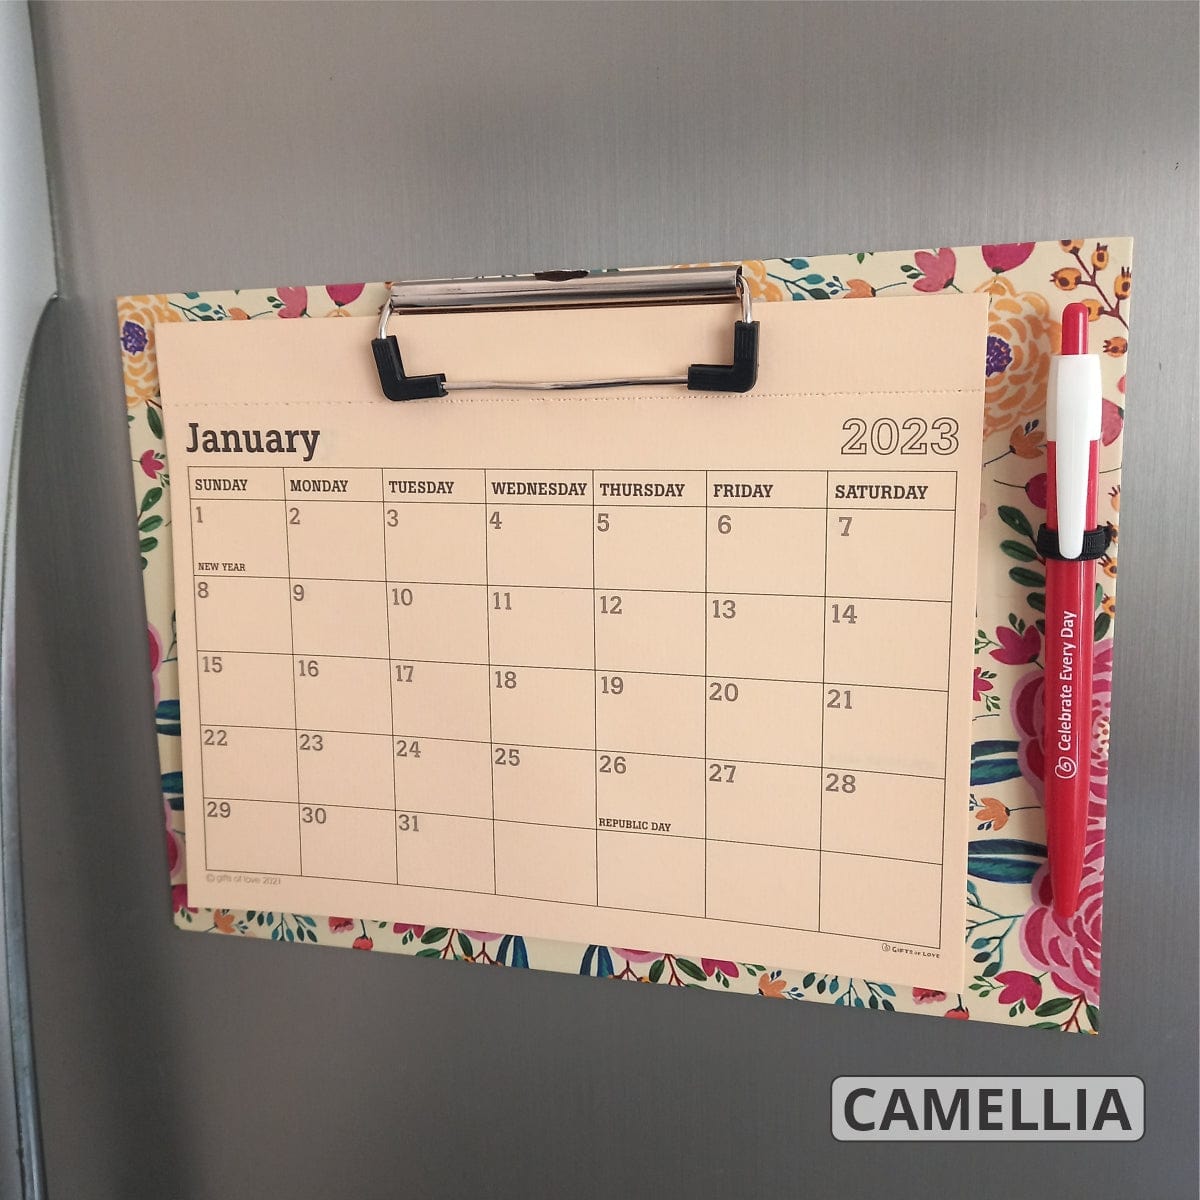 Corporate Gifting 2023 Magnetic Calendar & Wall Mountable Clipboard Calendar with Pen